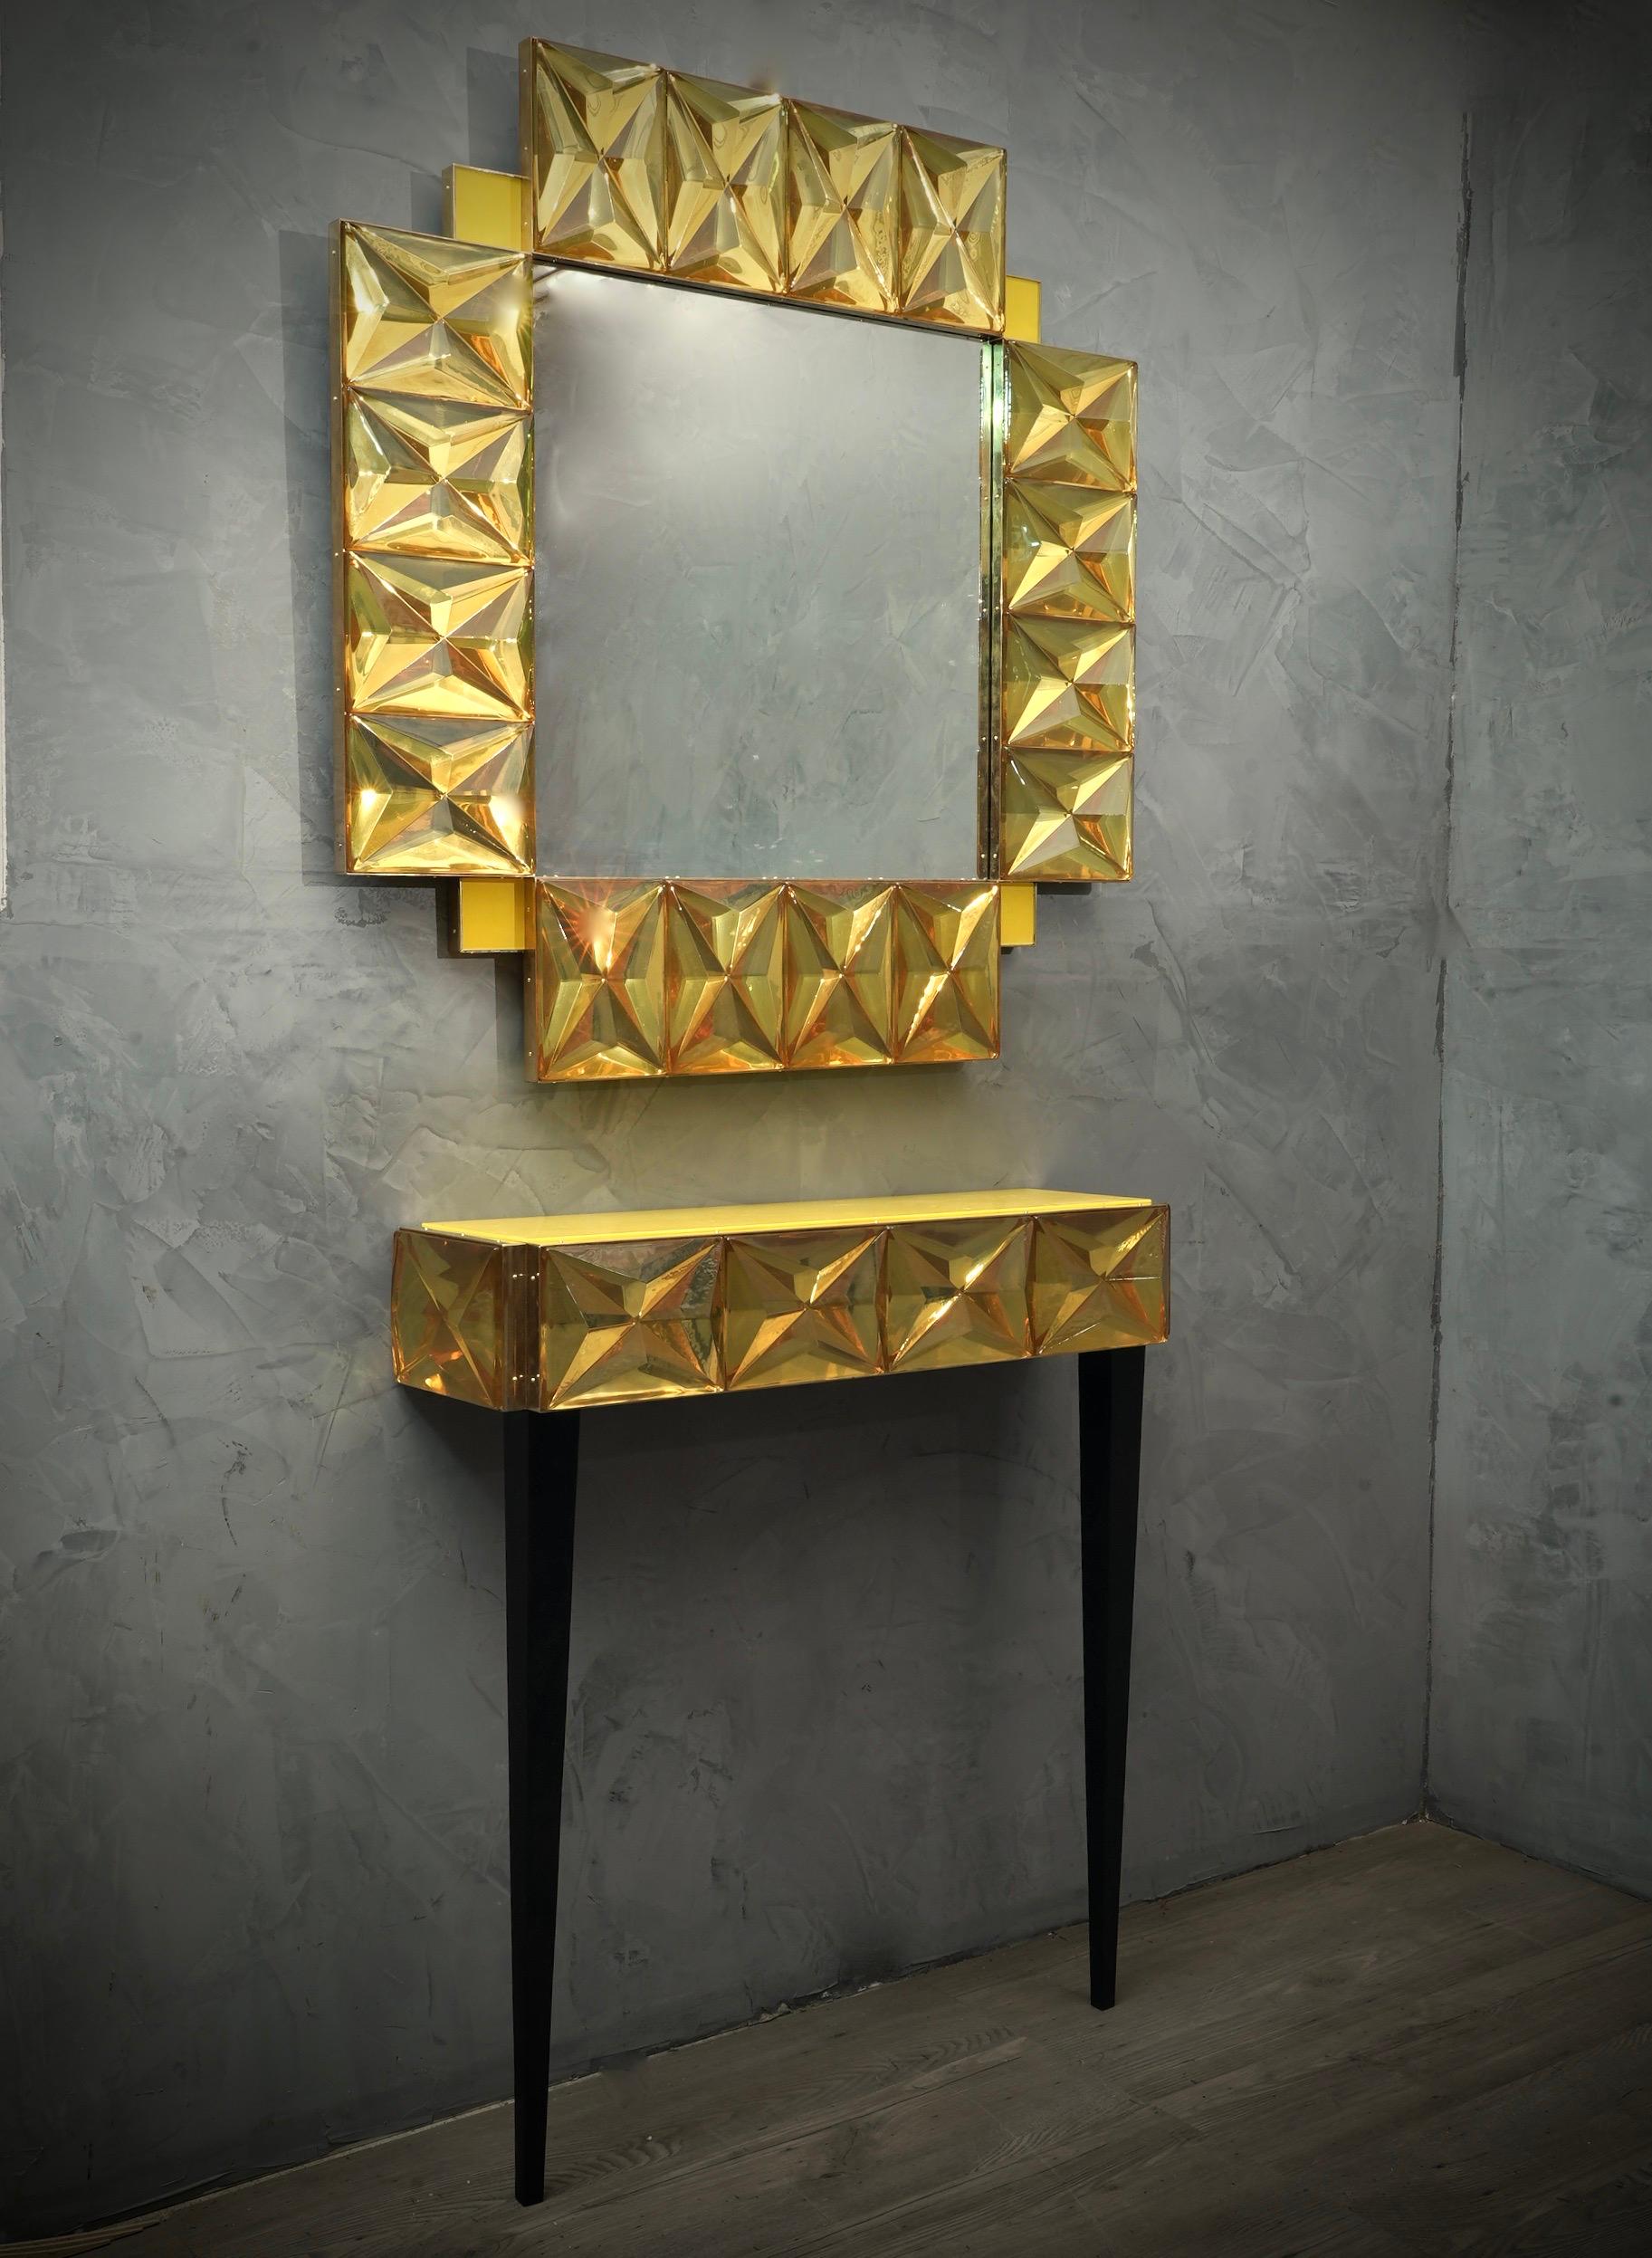 Exciting and lively Murano glass console, small and measured but simply unique. Elegant, surprisingly provocative in color and design. The glass blocks can be had in other colours, look at the photos.

The console has a rectangular wooden structure;